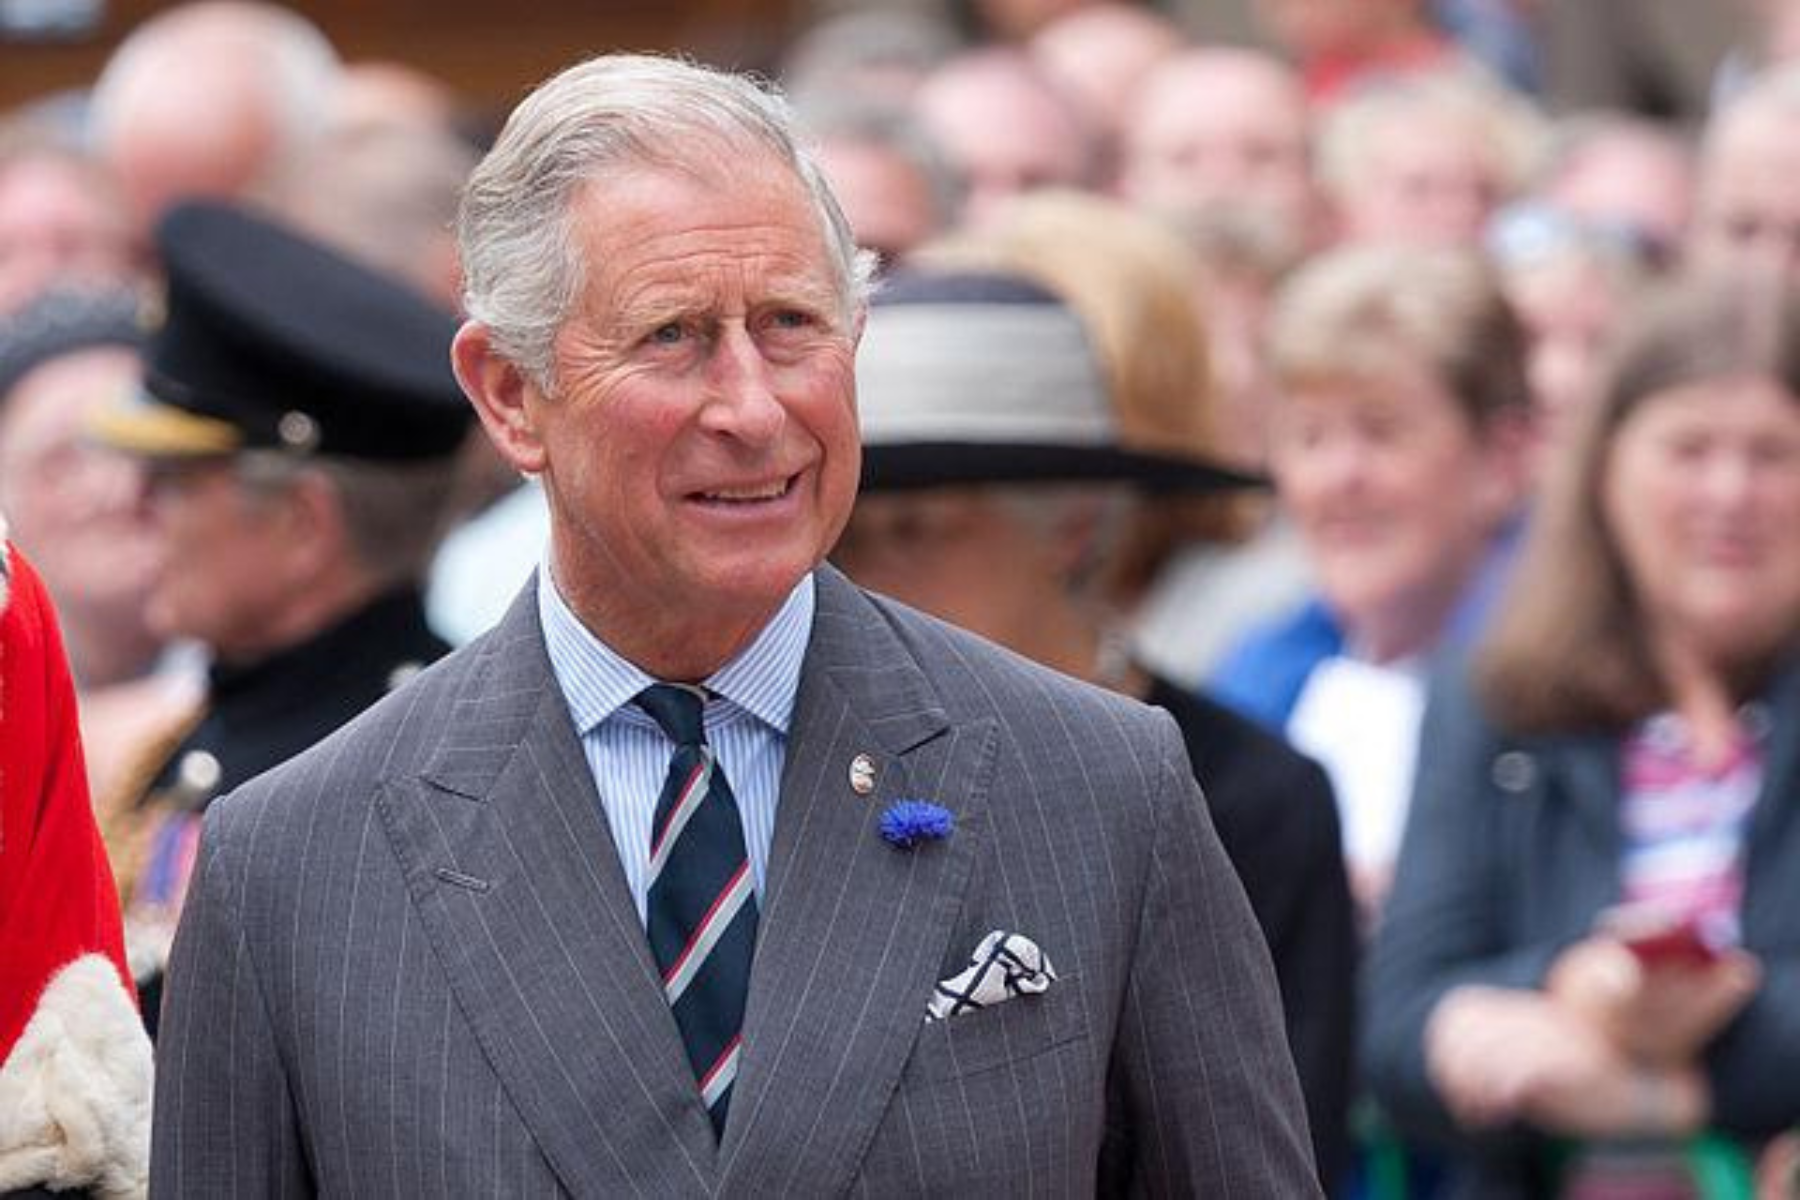 King Charles III has been diagnosed with Cancer